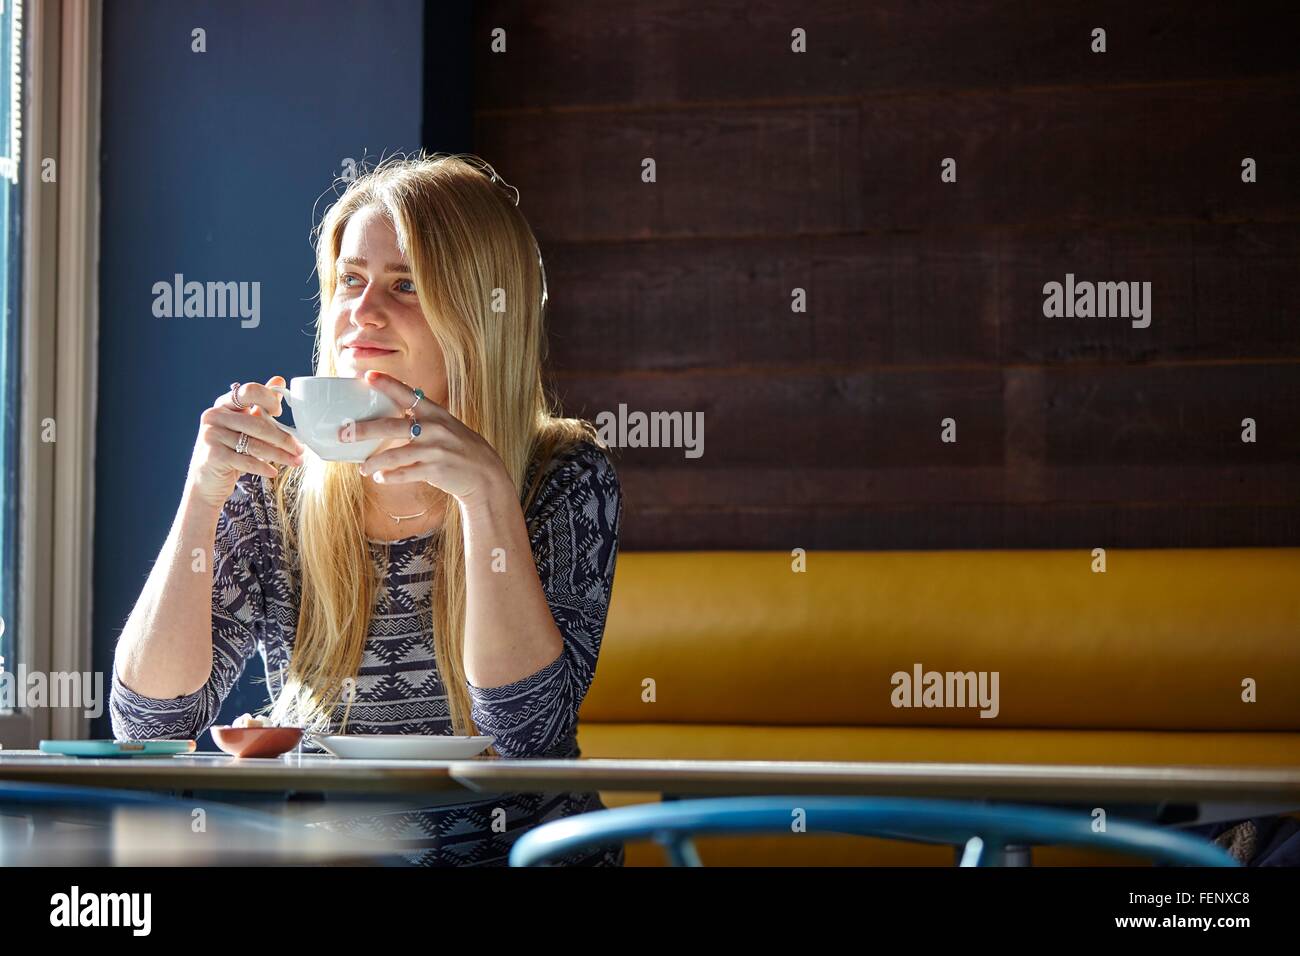 Young woman alone in cafe drinking coffee Stock Photo